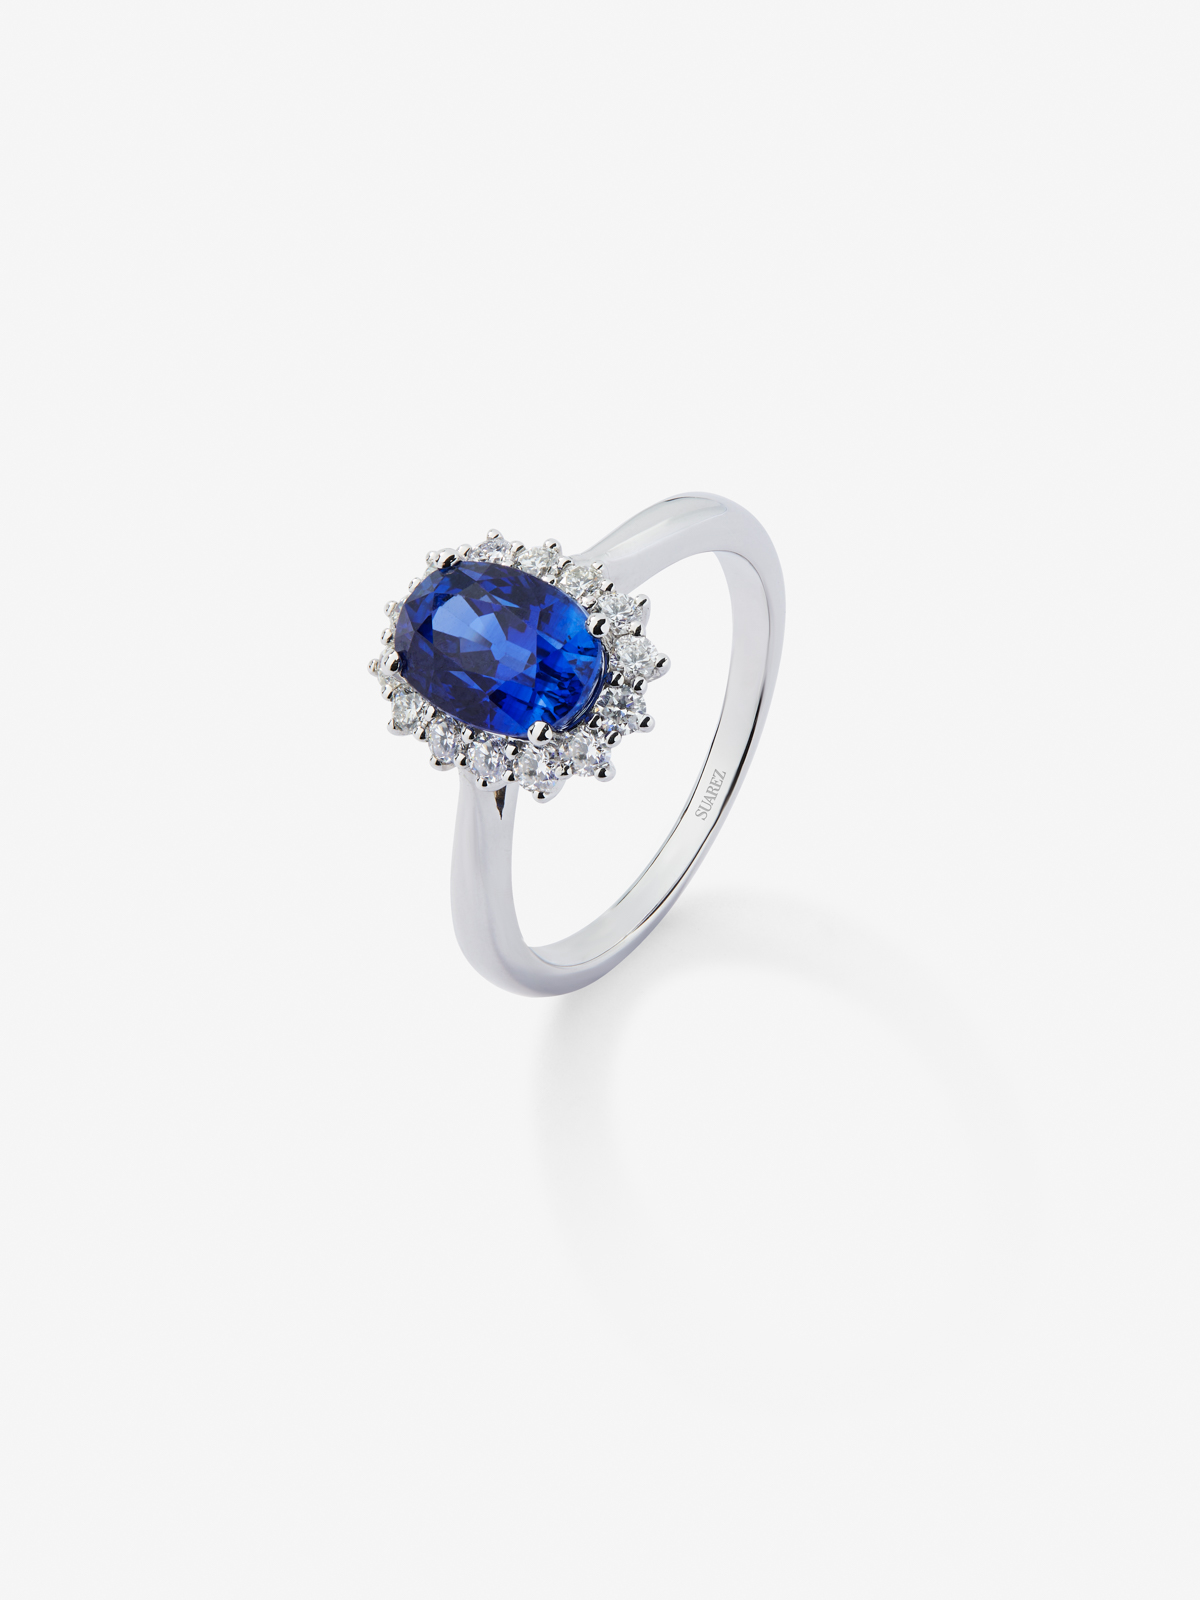 18K White Gold Ring with Royal Blue Sapor